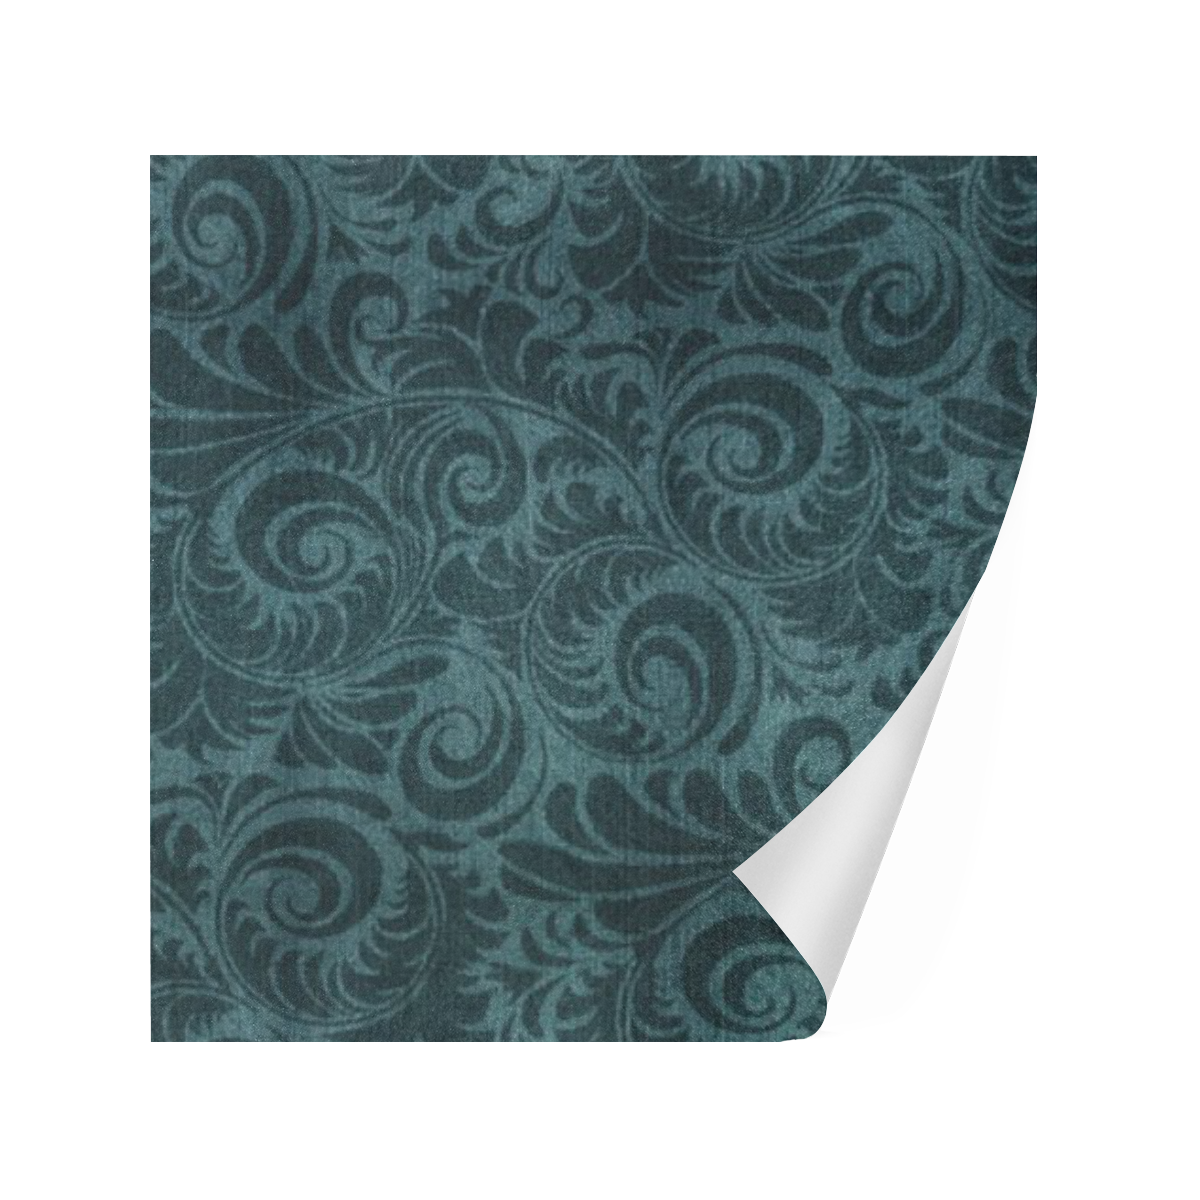 Denim with vintage floral pattern, dark green teal Gift Wrapping Paper 58"x 23" (5 Rolls)